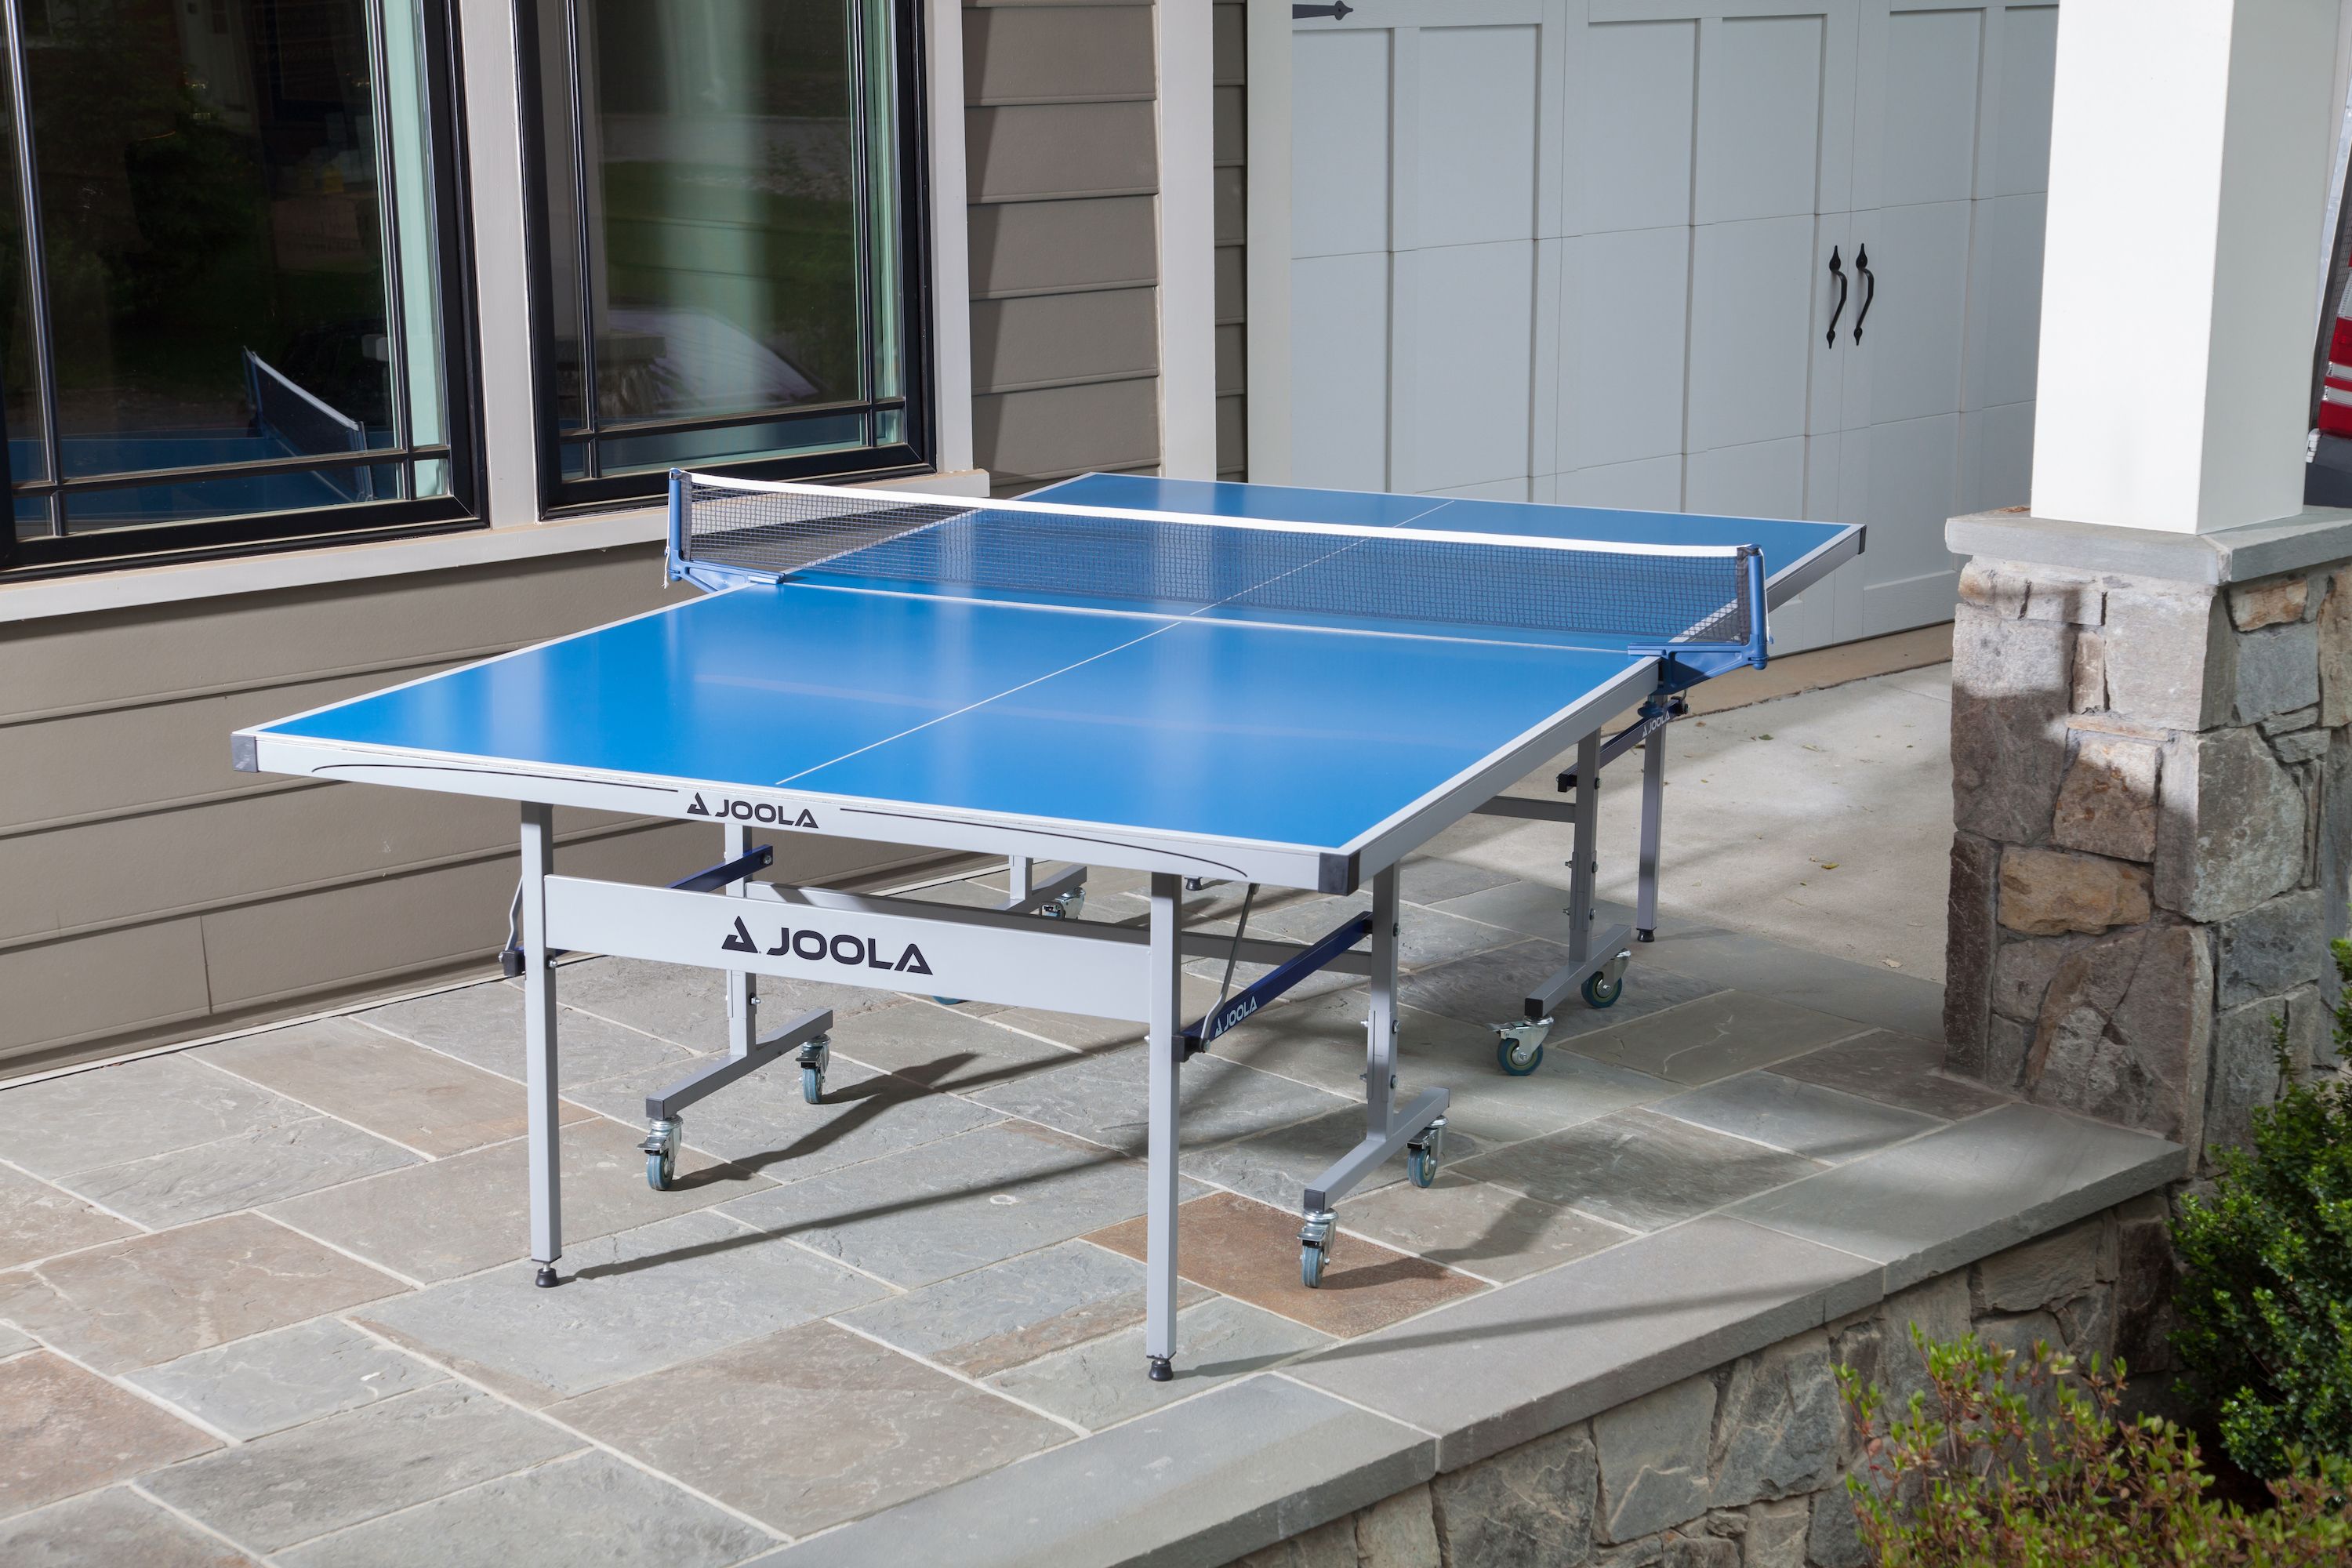 ping pong tables